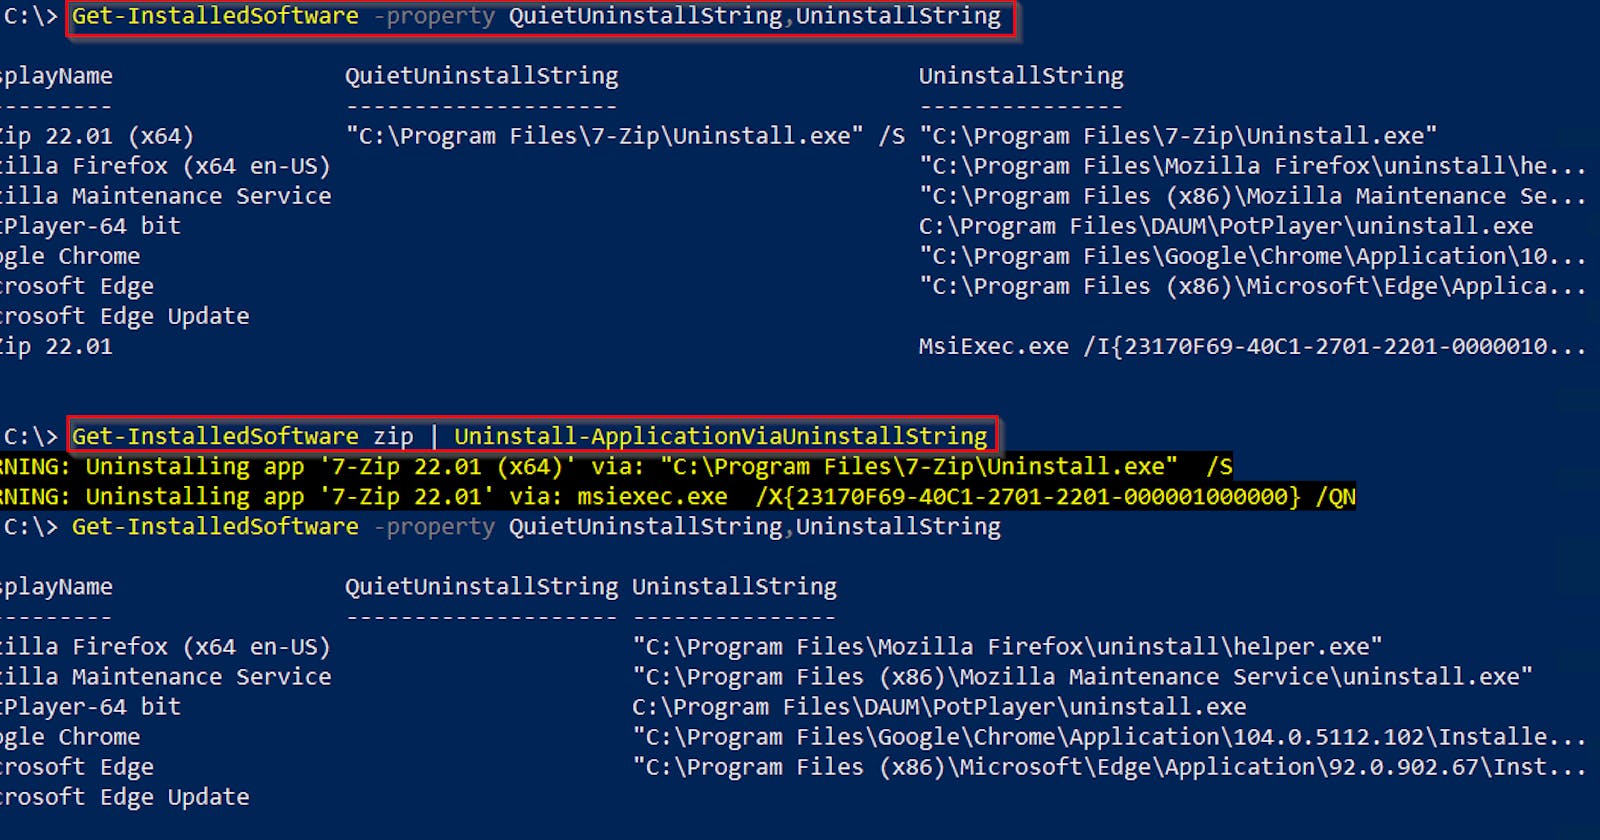 Easy removal of preinstalled bloatware using PowerShell